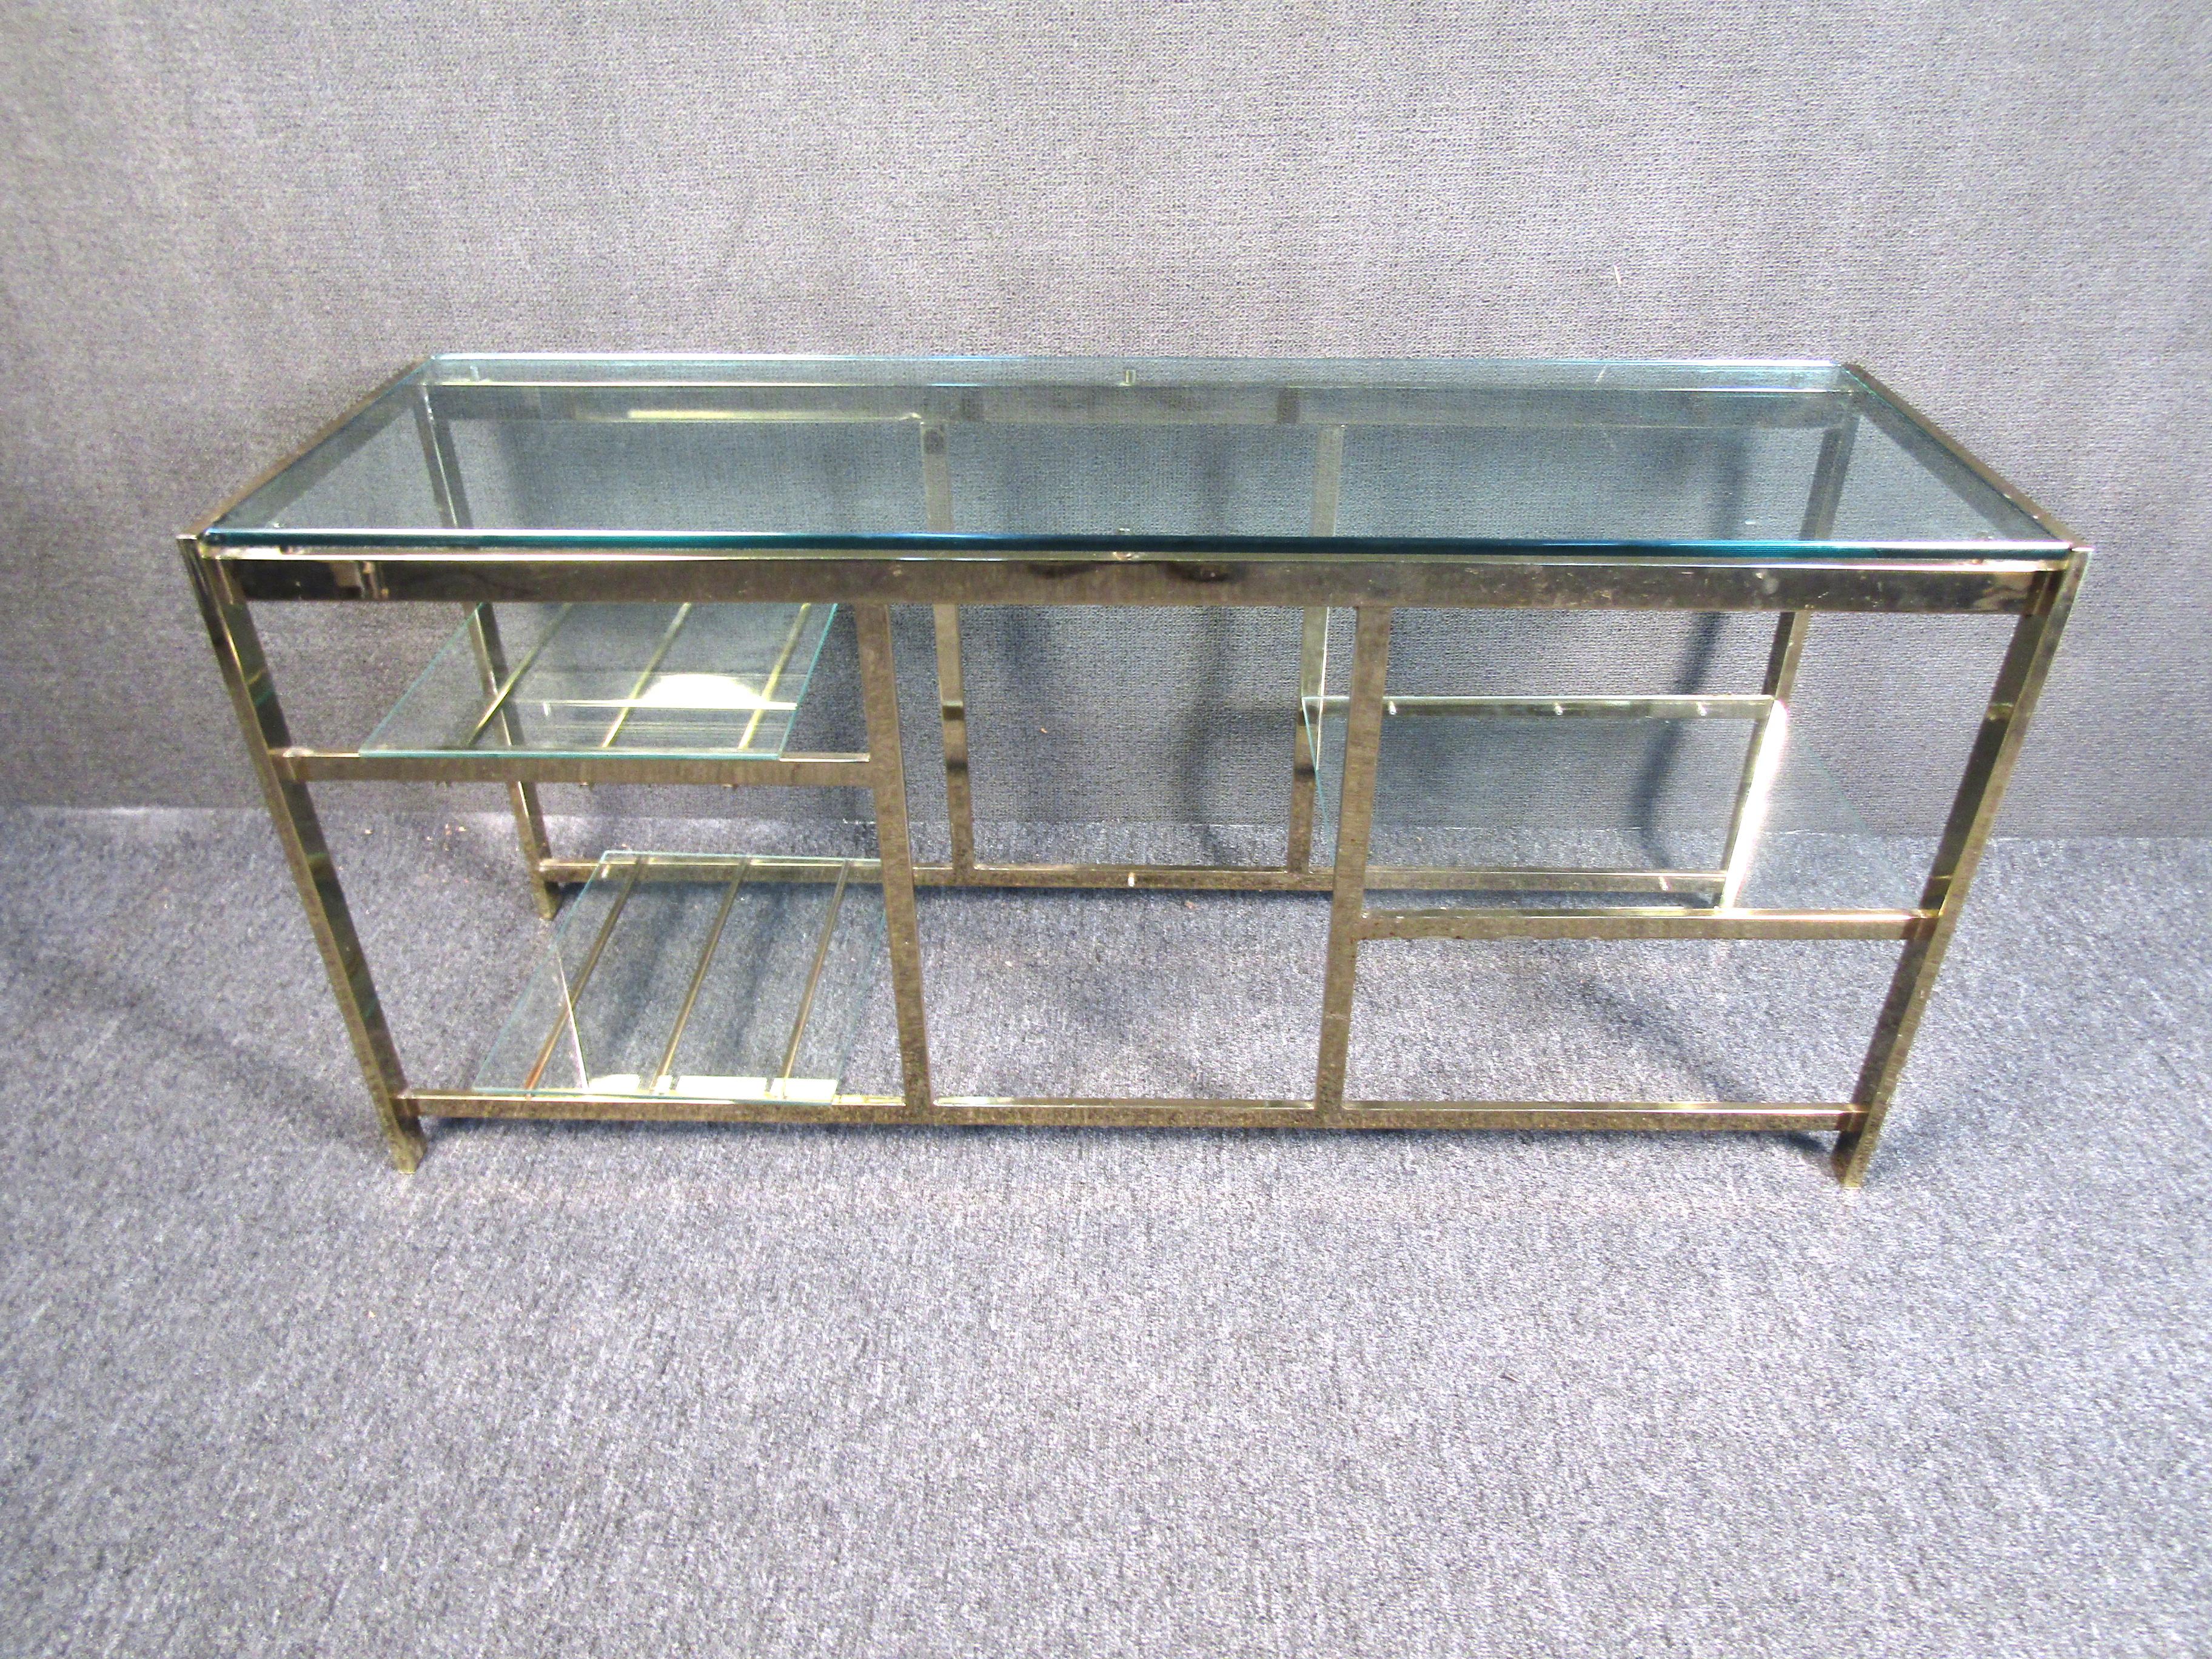 This striking vintage table combines an angular metal frame with glass shelving for a design full of midcentury elegance. A unique table that is perfect for serving guests, displaying decorative items, or adding a modern decorating taste to any